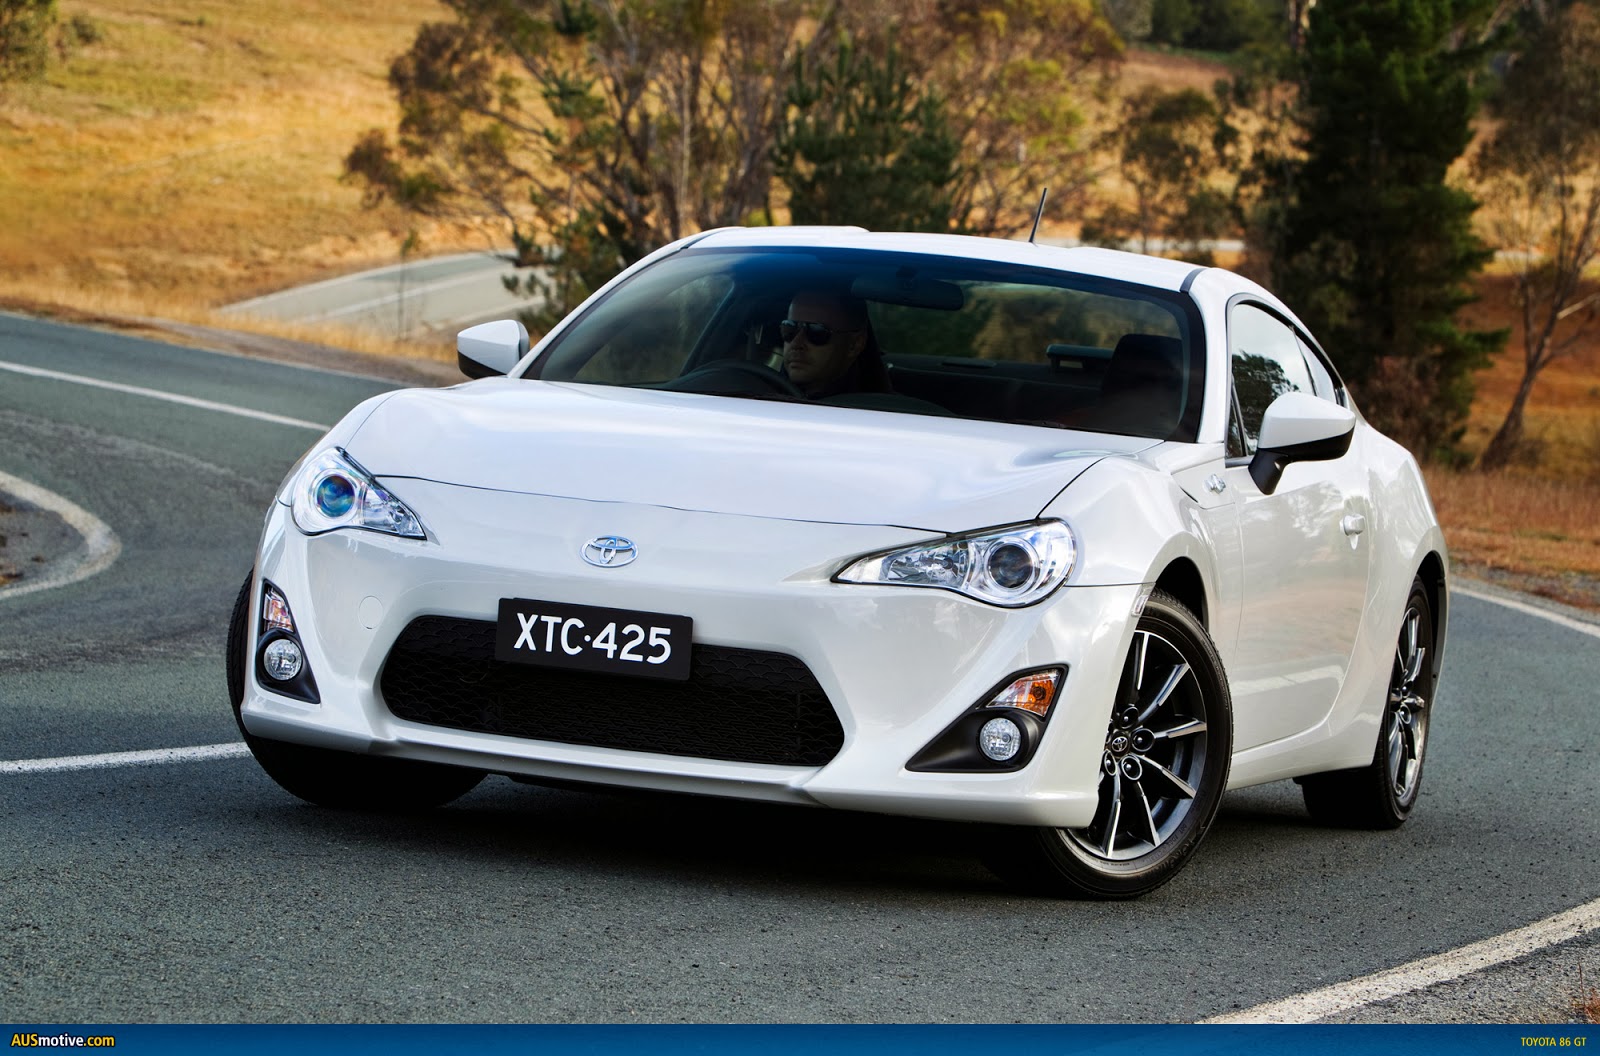 Toyota 86 GT HD Wallpapers | HDWallpapers360.com - High Definition ...